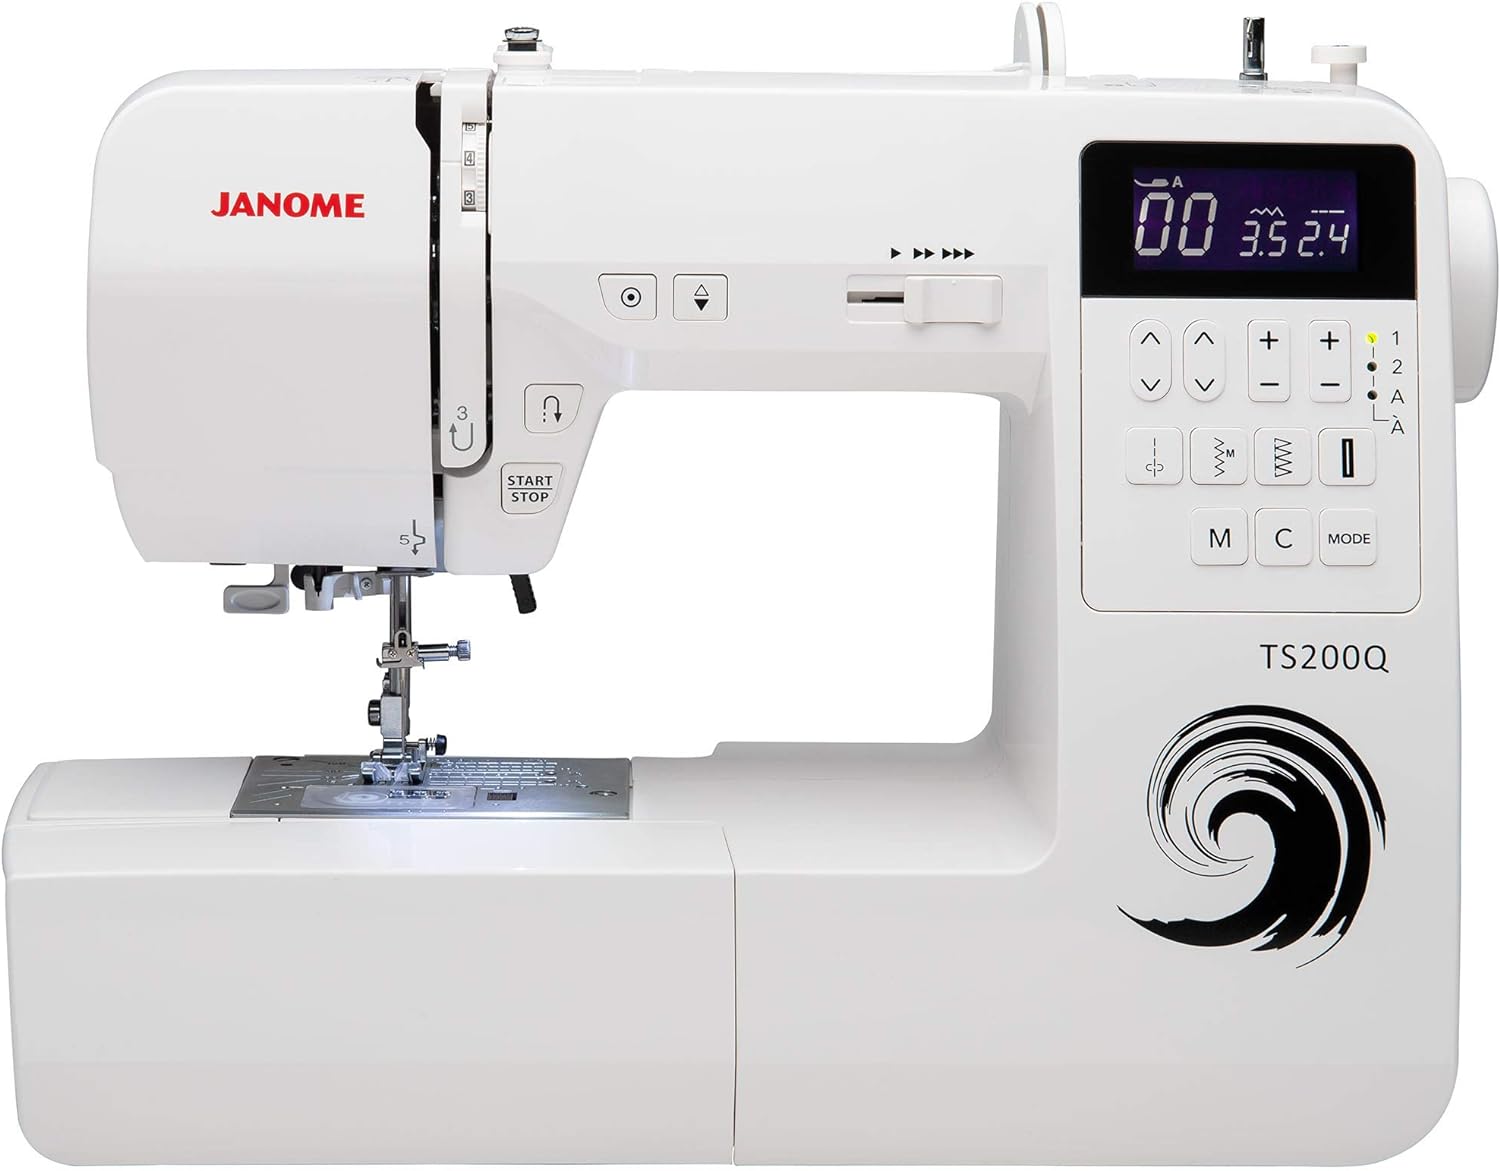 Janome TS200Q Computerized Sewing and Quilting Machine